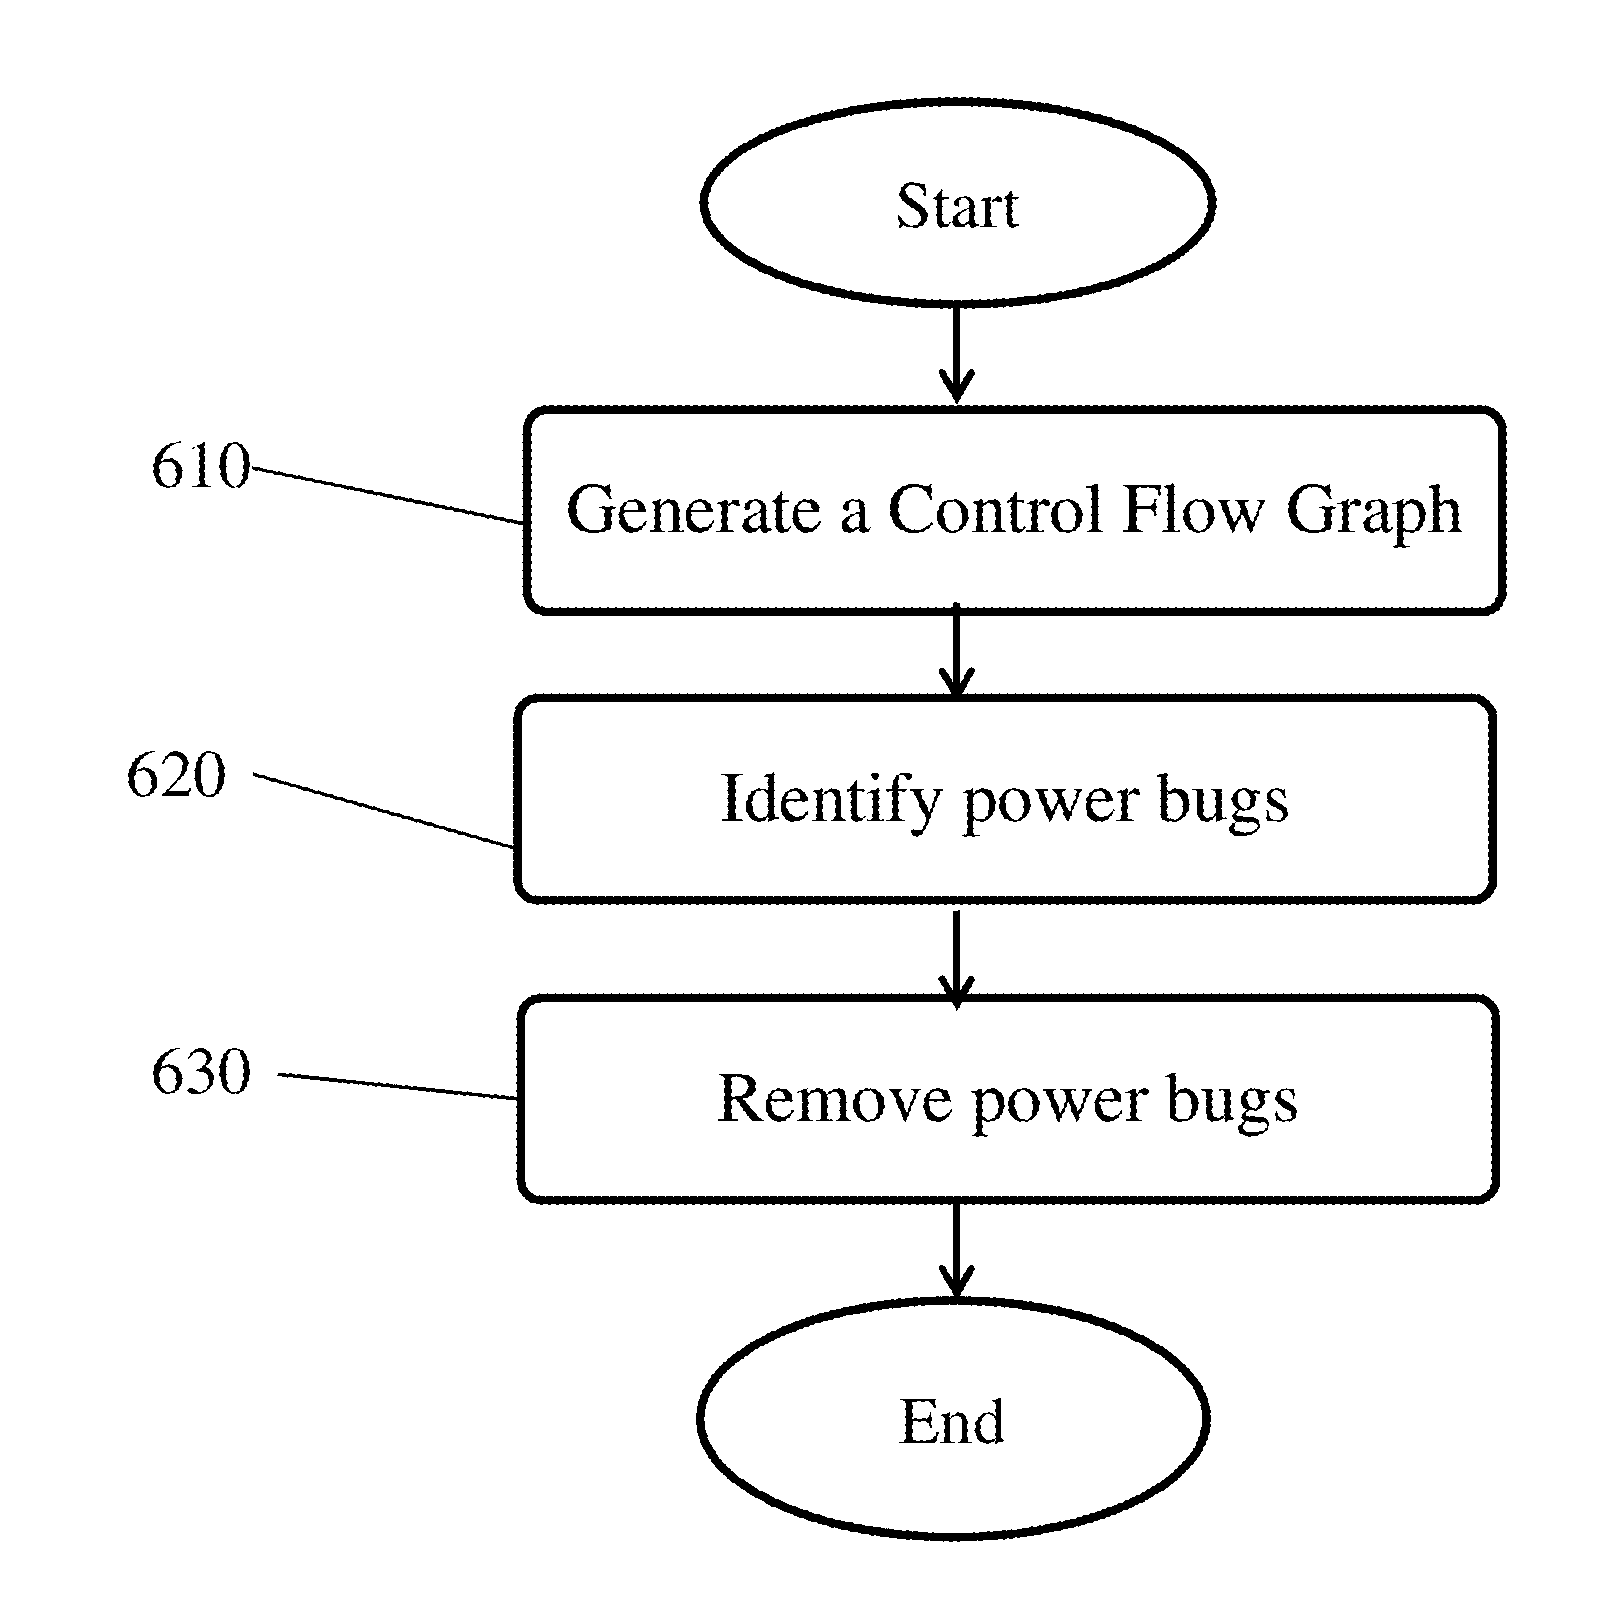 Systems and Methods of Detecting Power Bugs